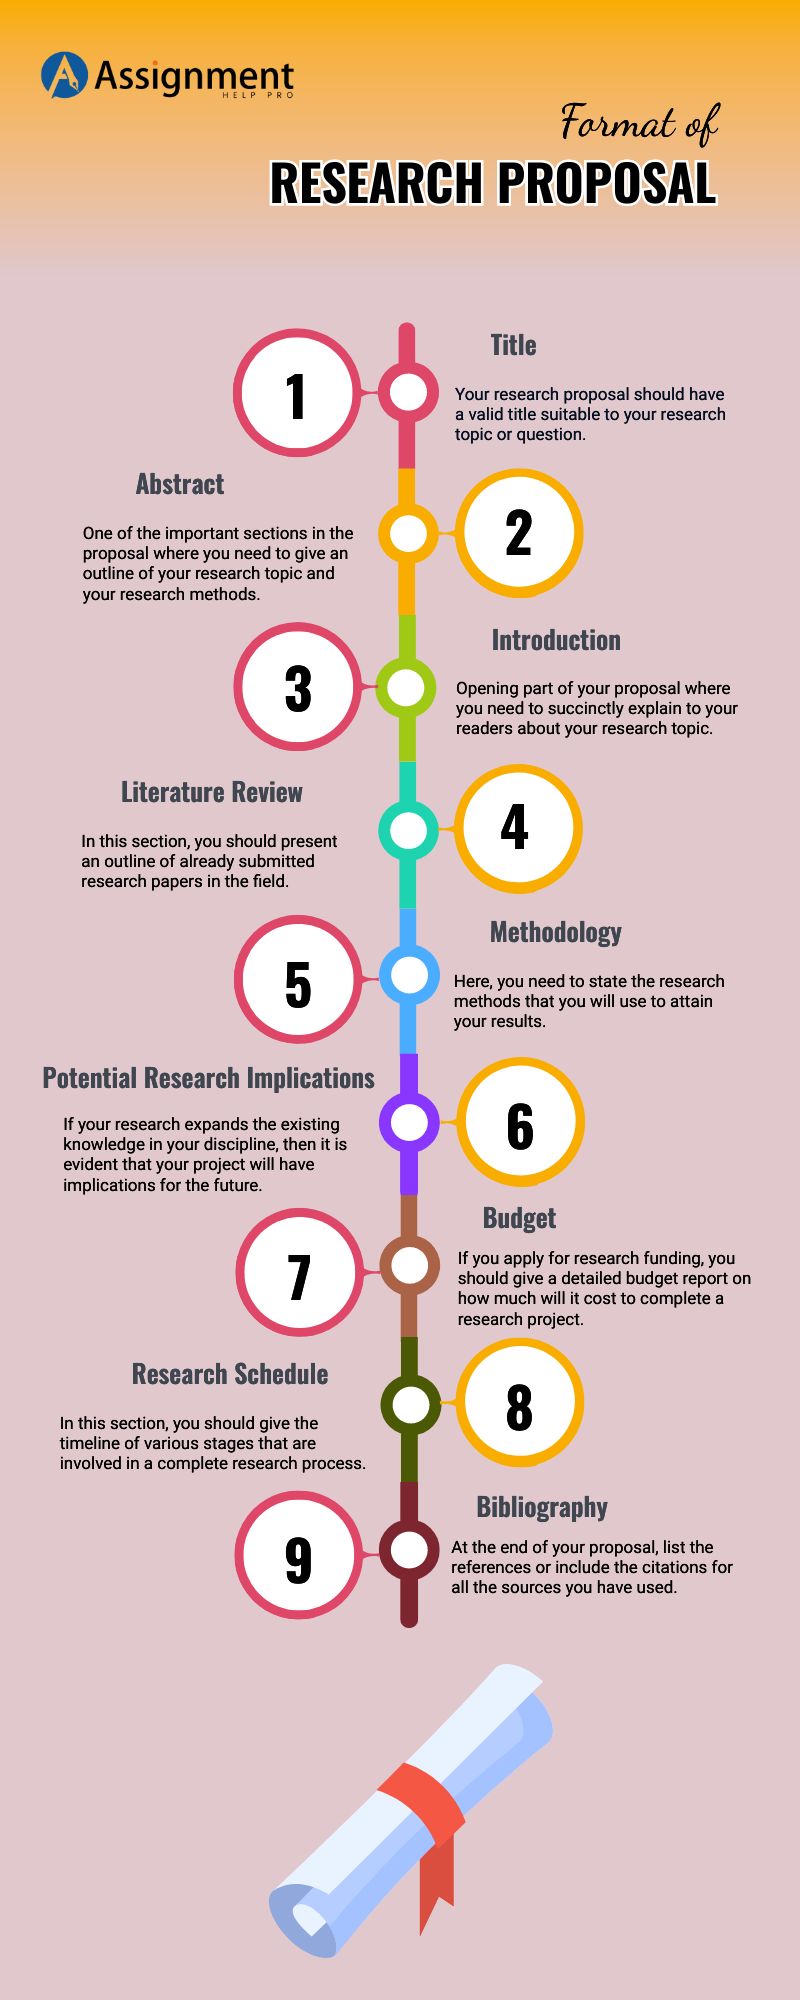 key parts of a research proposal